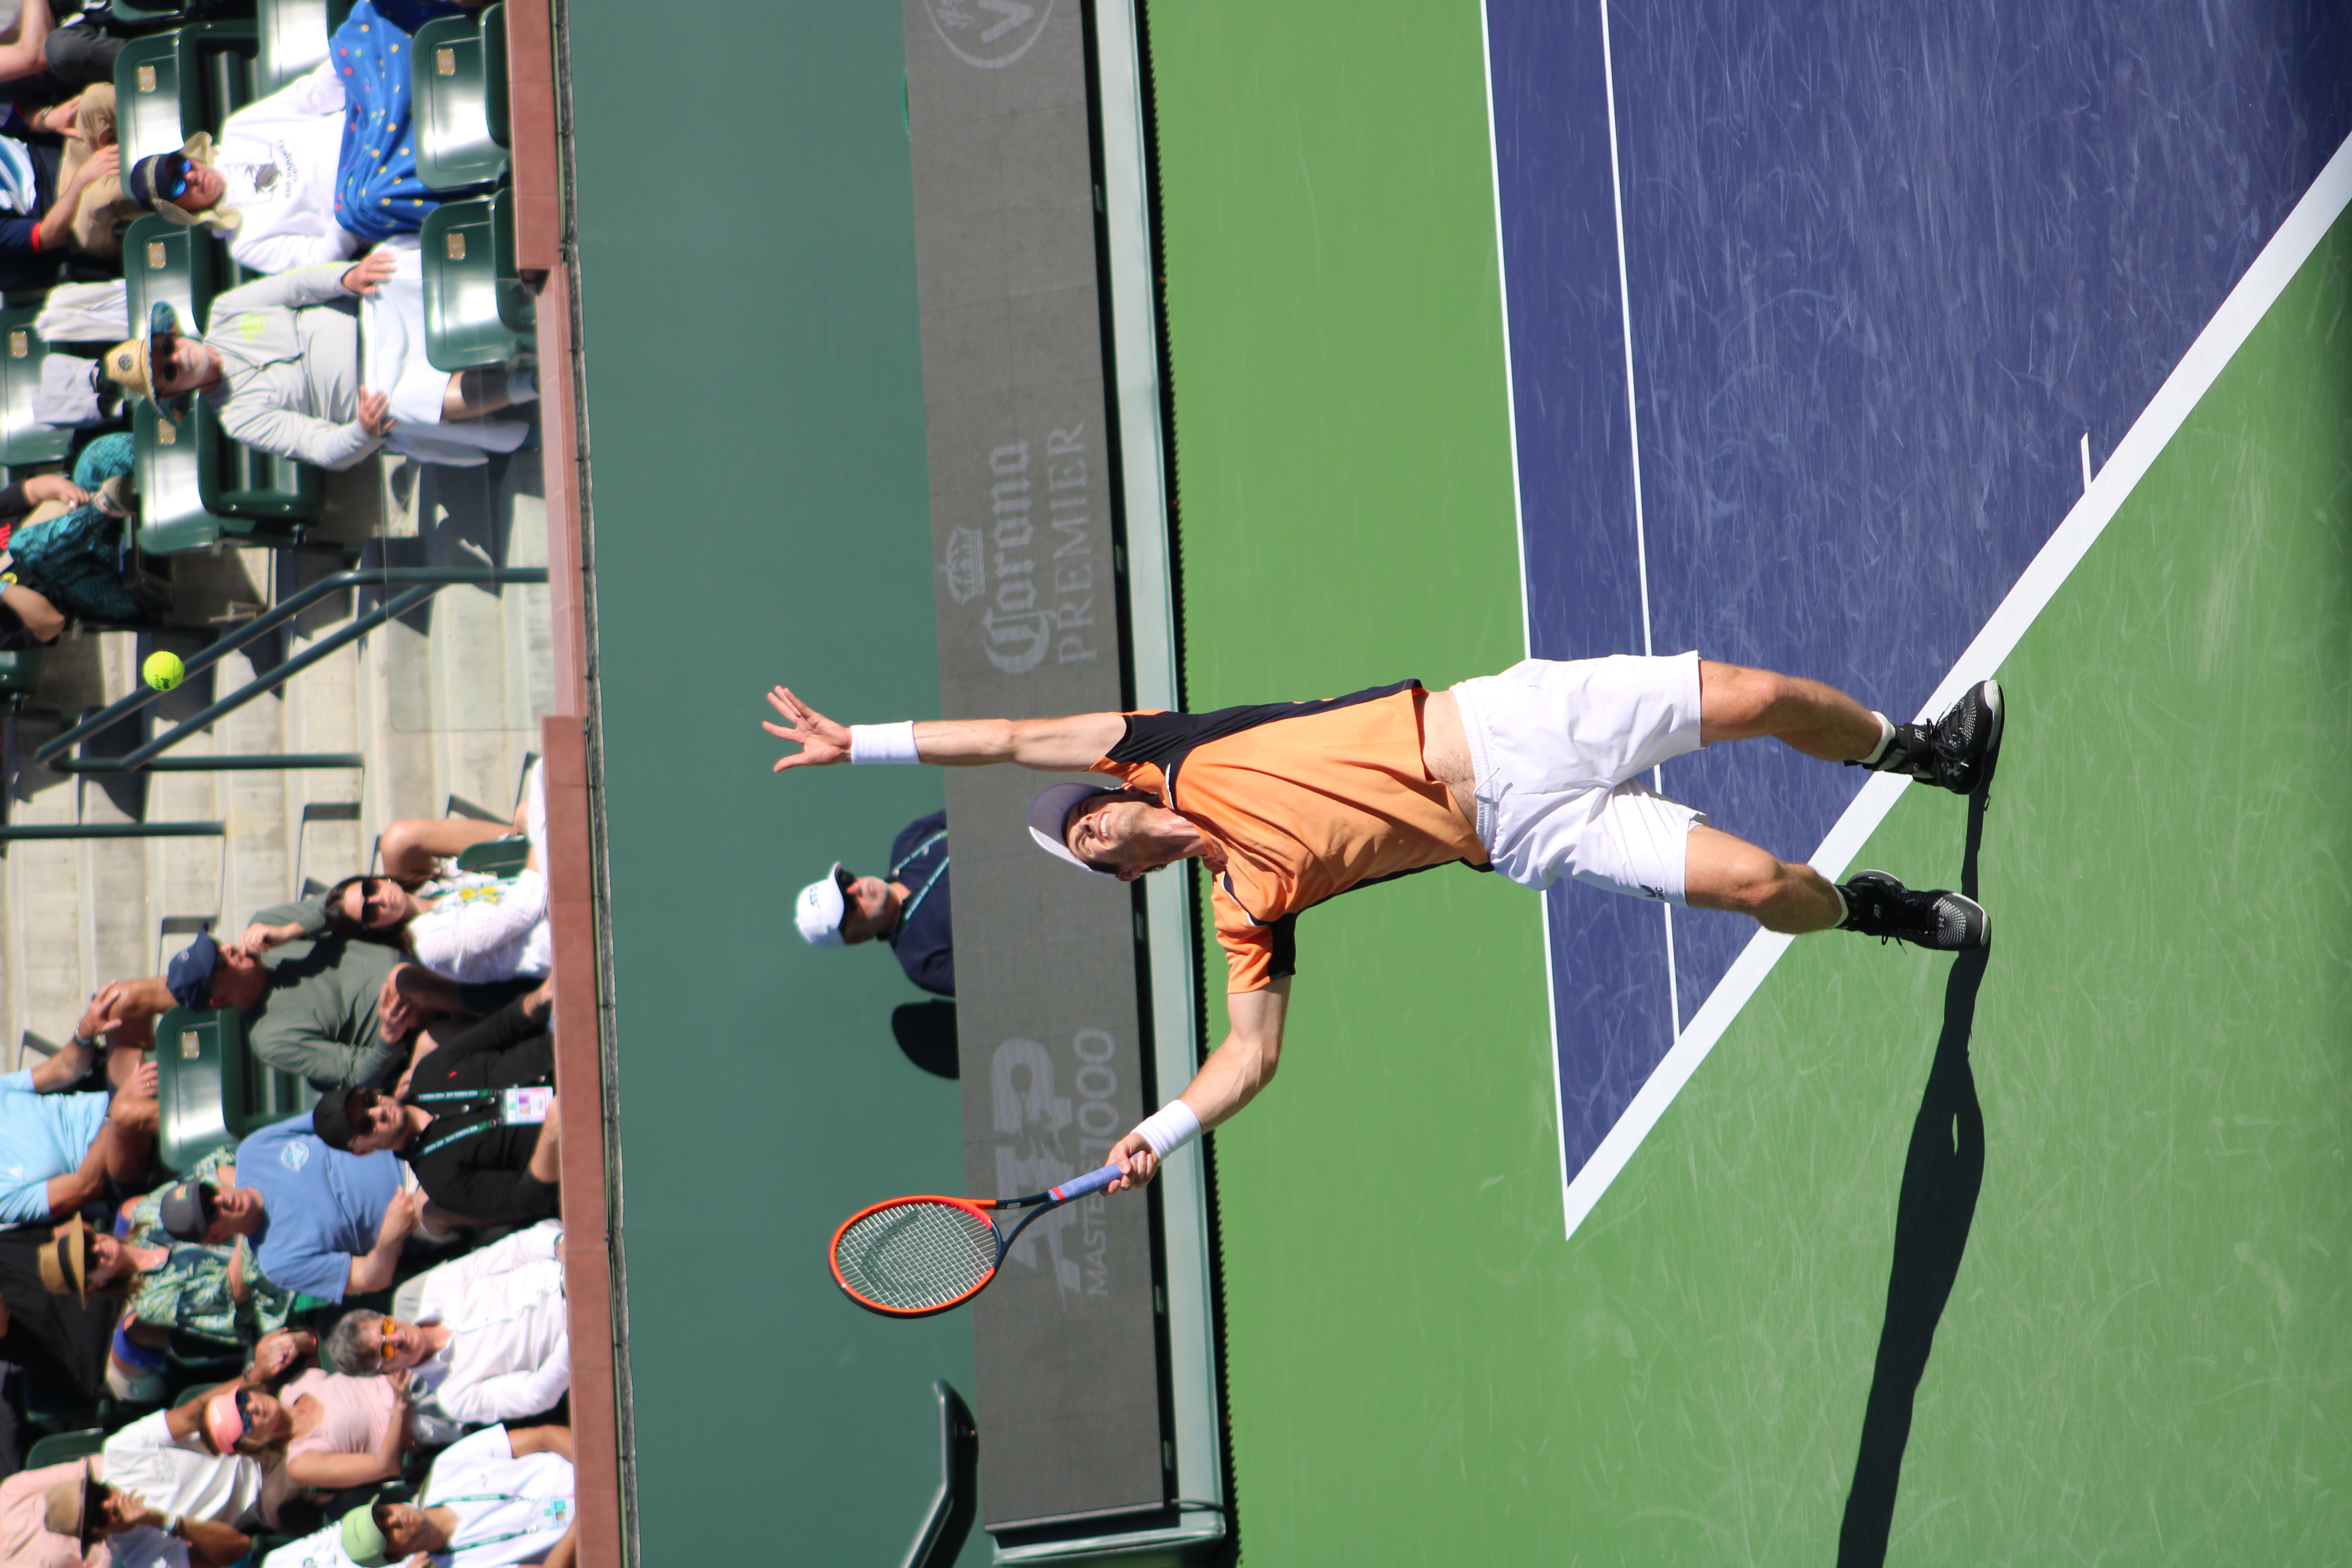 Sir Andy Murray serving tennis ball at BNP Paribas Open in Indian Wells, CA